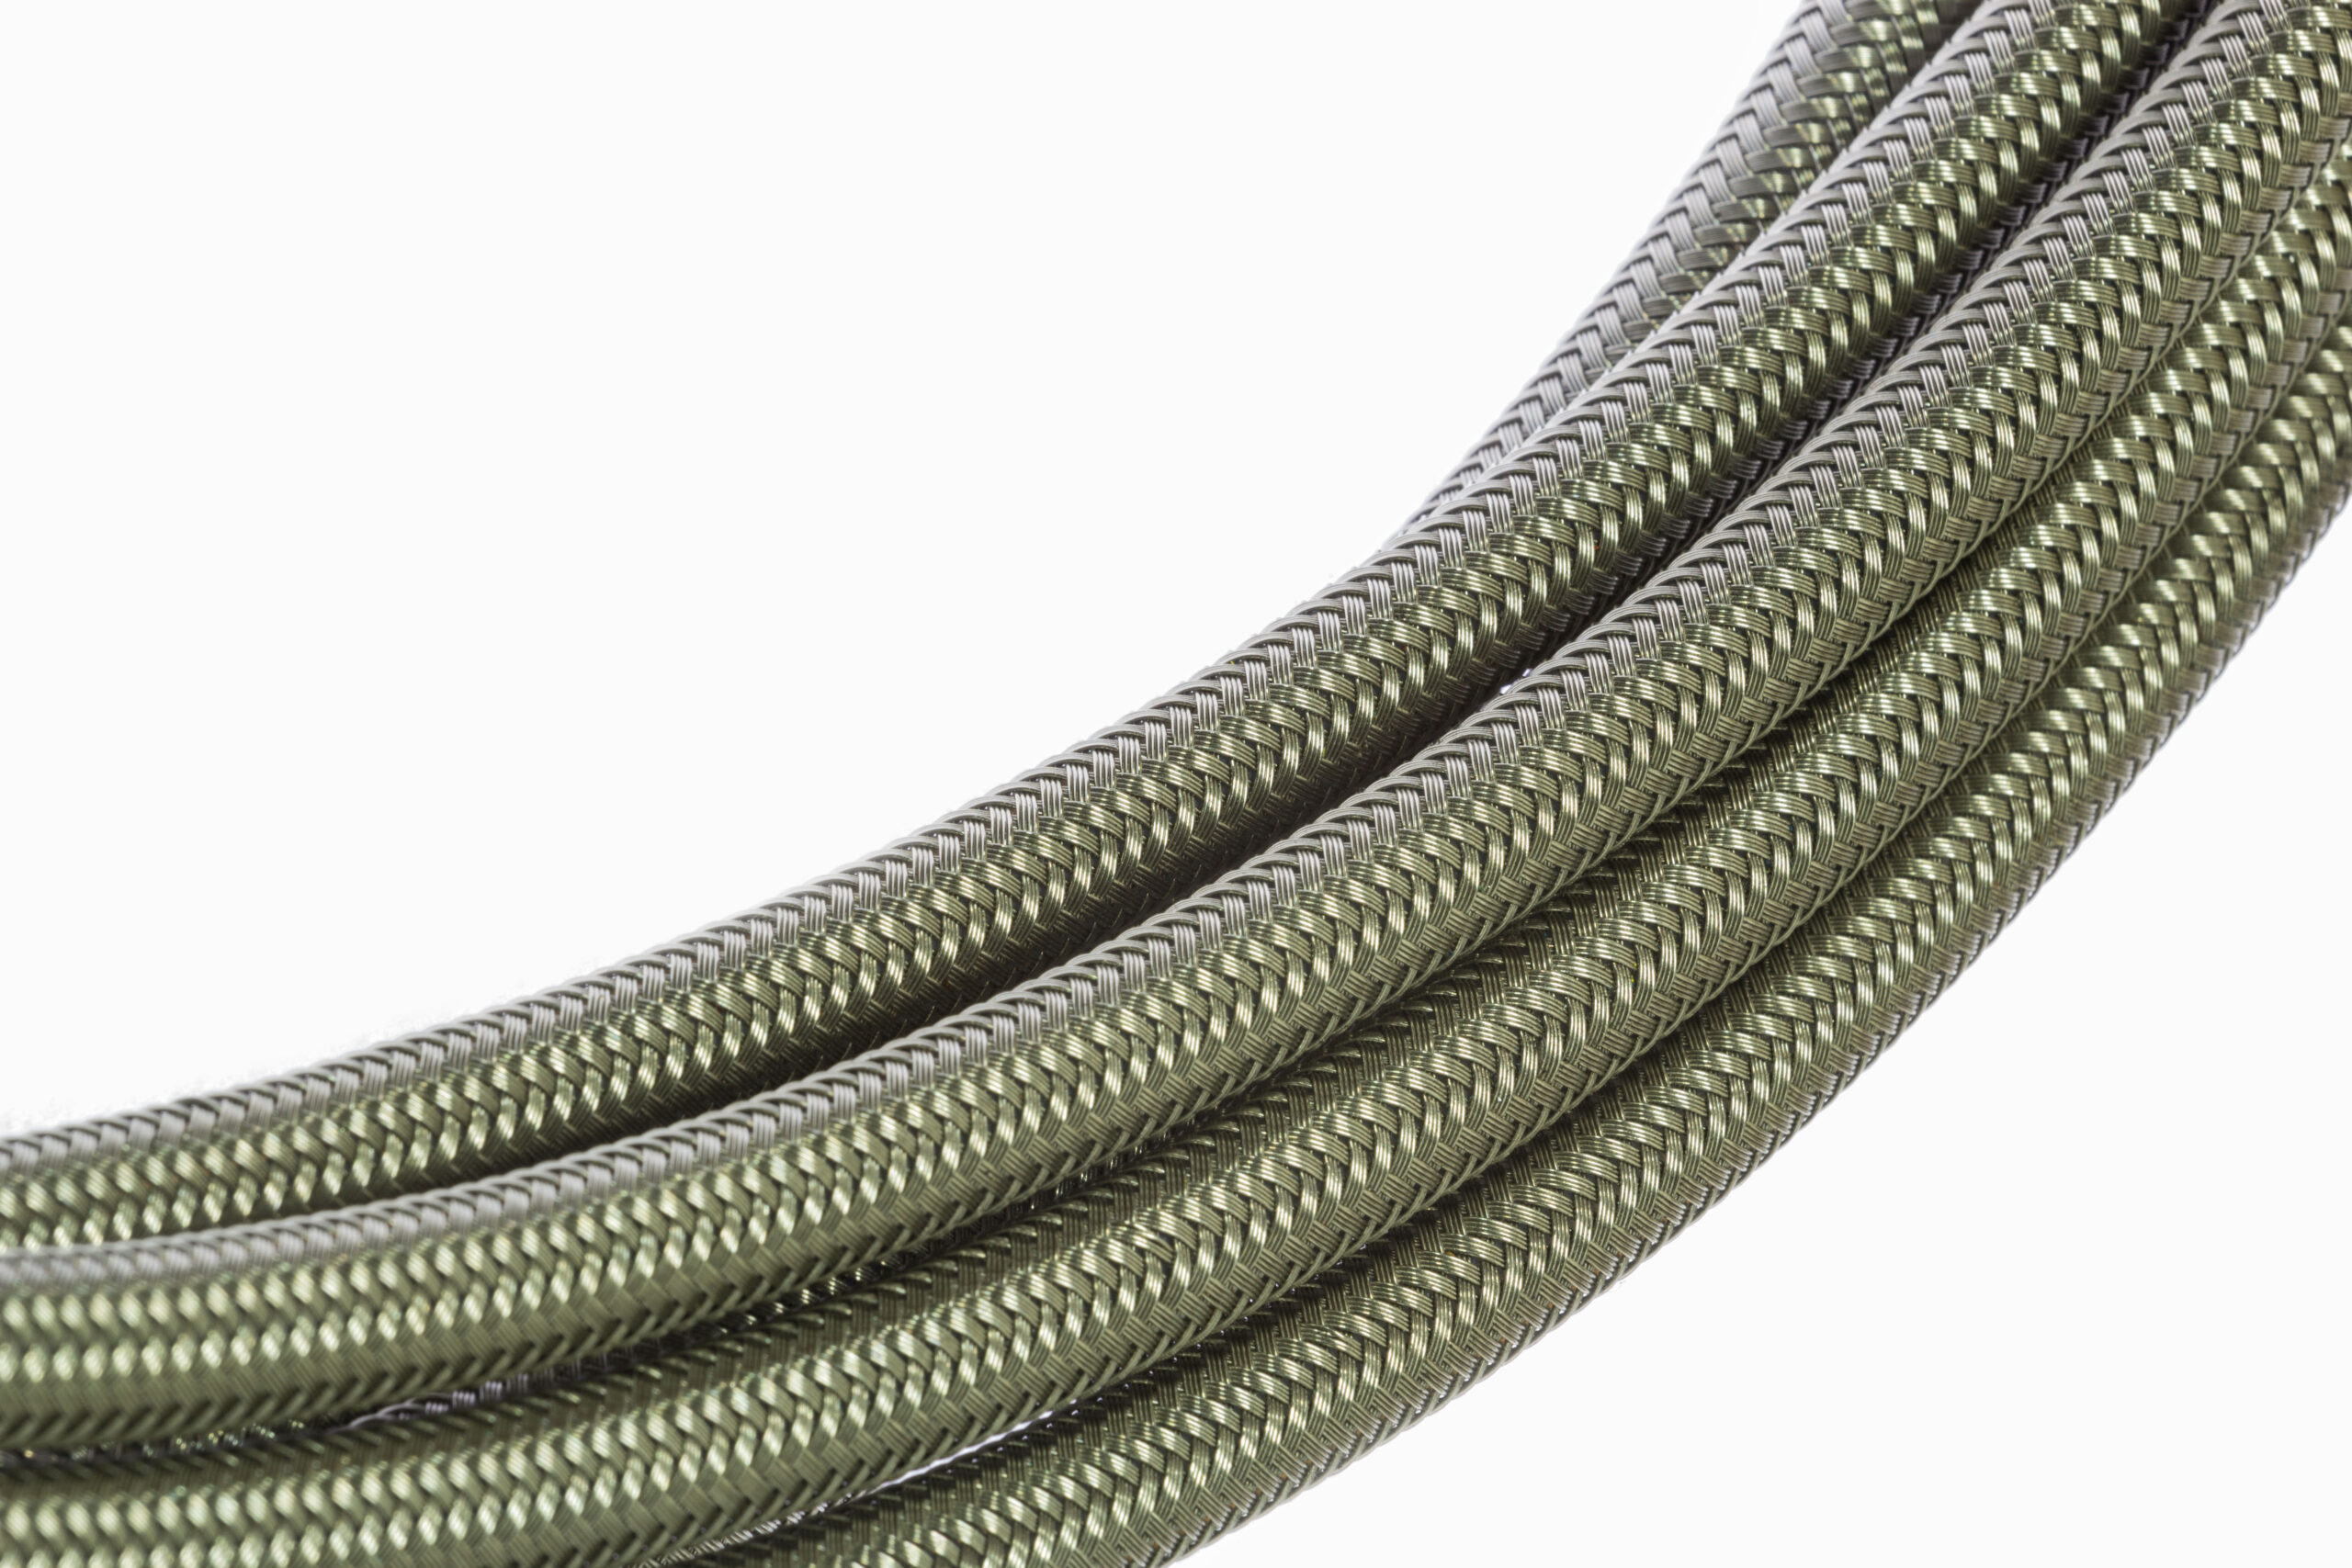 The Benefits of Using Braided Hoses - Universal Hose and Braid